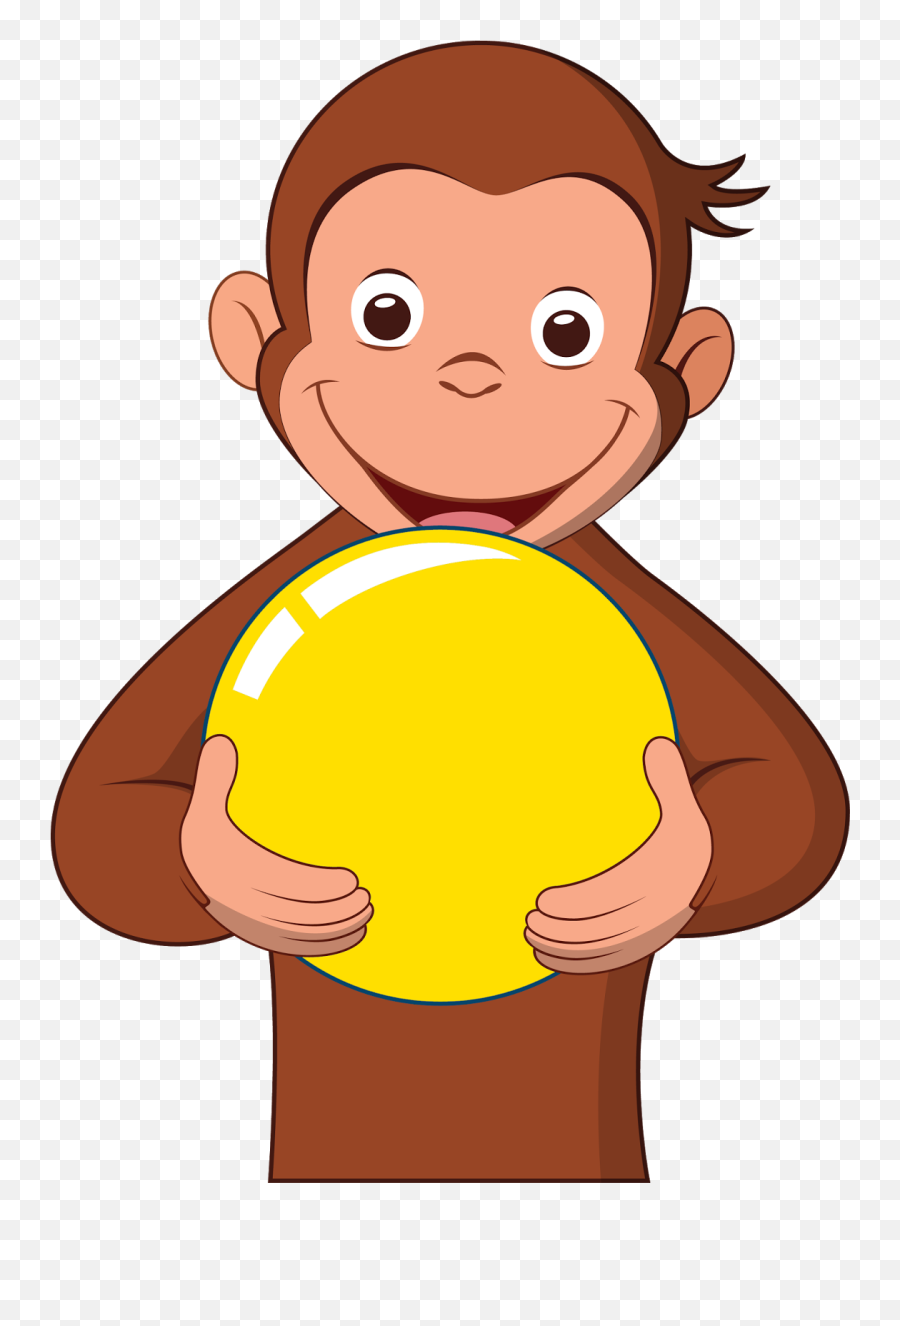 Download Image Result For Curious - Birthday Printable Curious George Png,Curious George Png